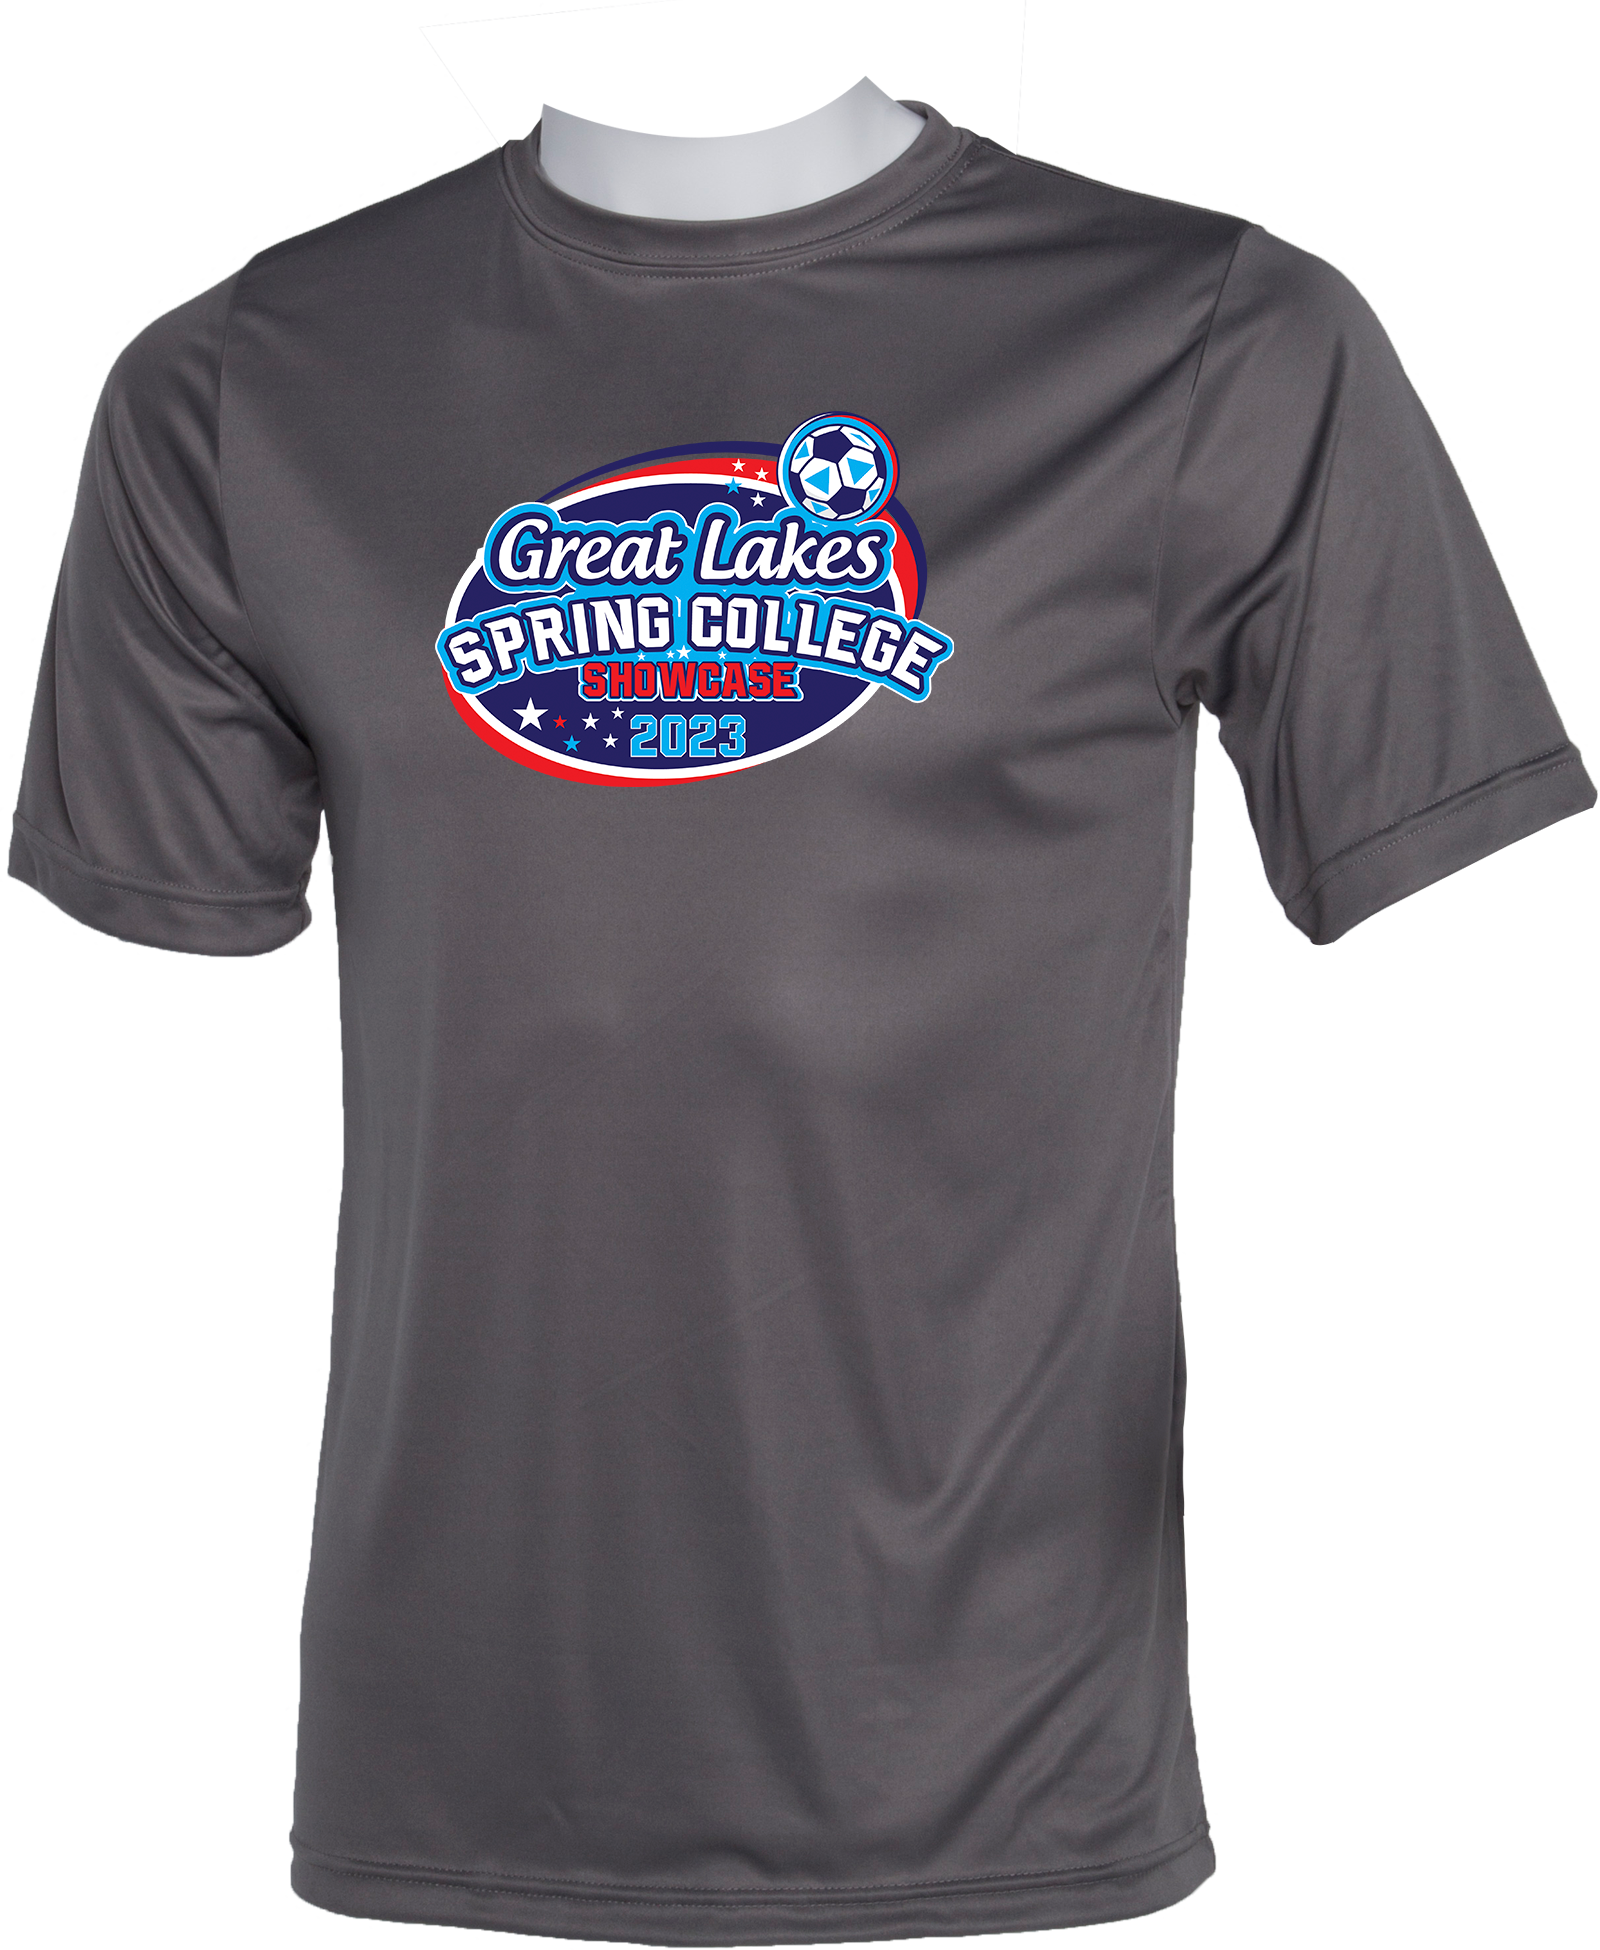 PERFORMANCE SHIRTS - 2023 Great Lakes Spring College Showcase